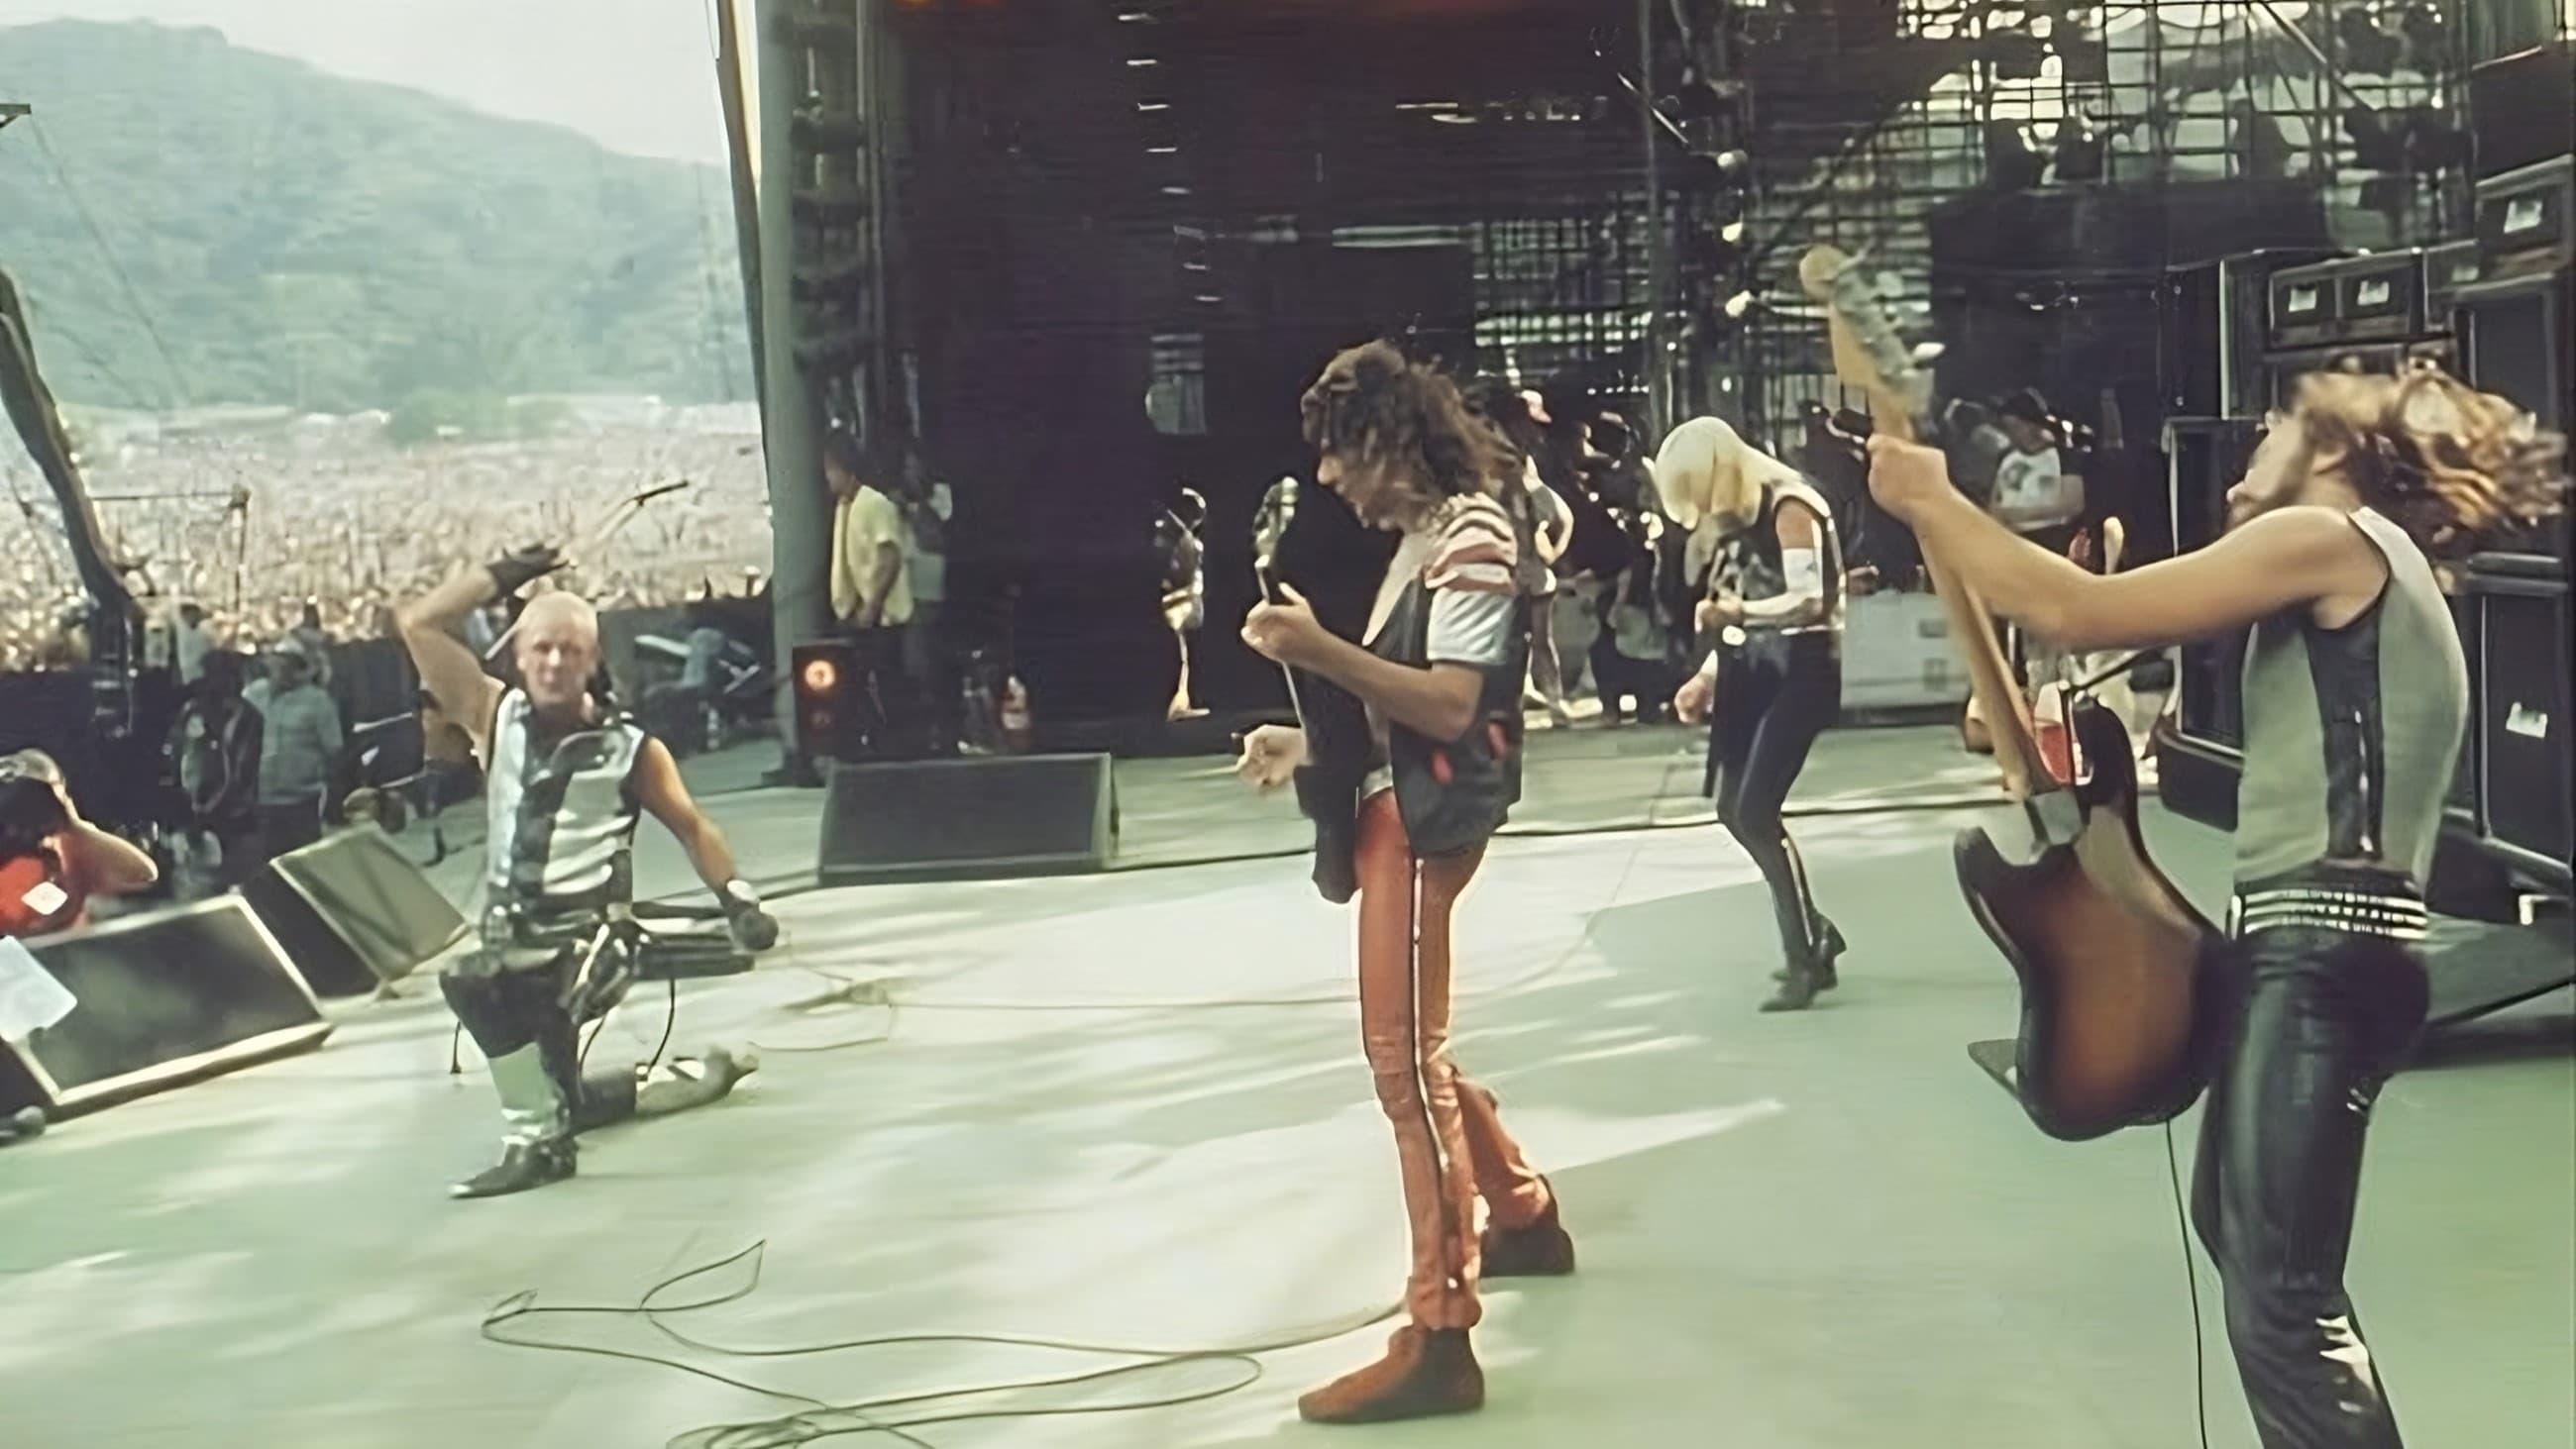 Judas Priest: Live at the US Festival backdrop